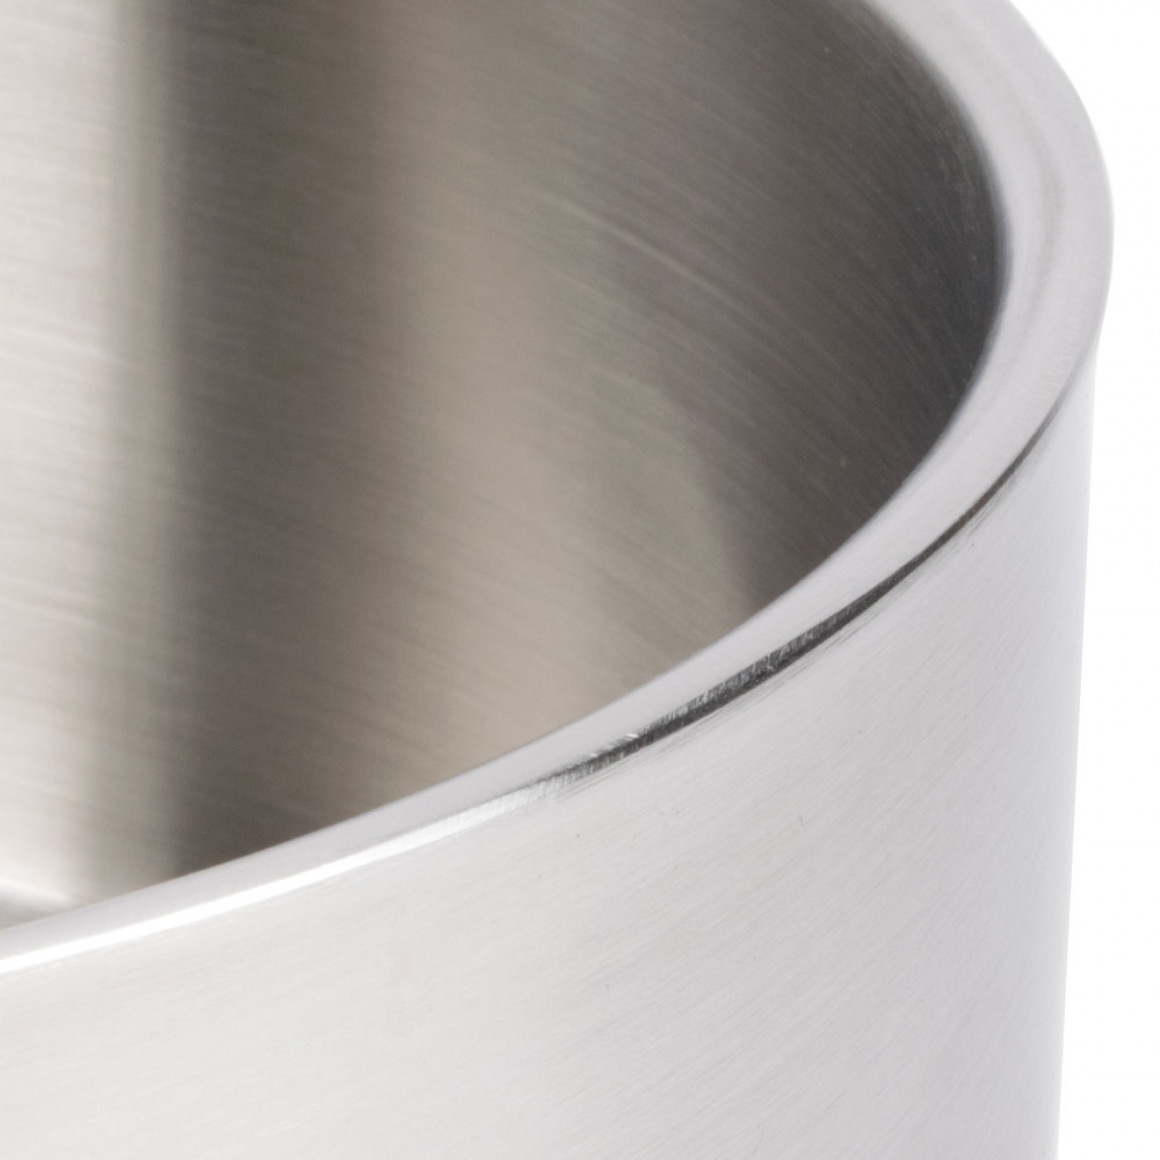 STAINLESS STEEL, SATIN BOWL, DOUBLE WALL, 338 OZ.